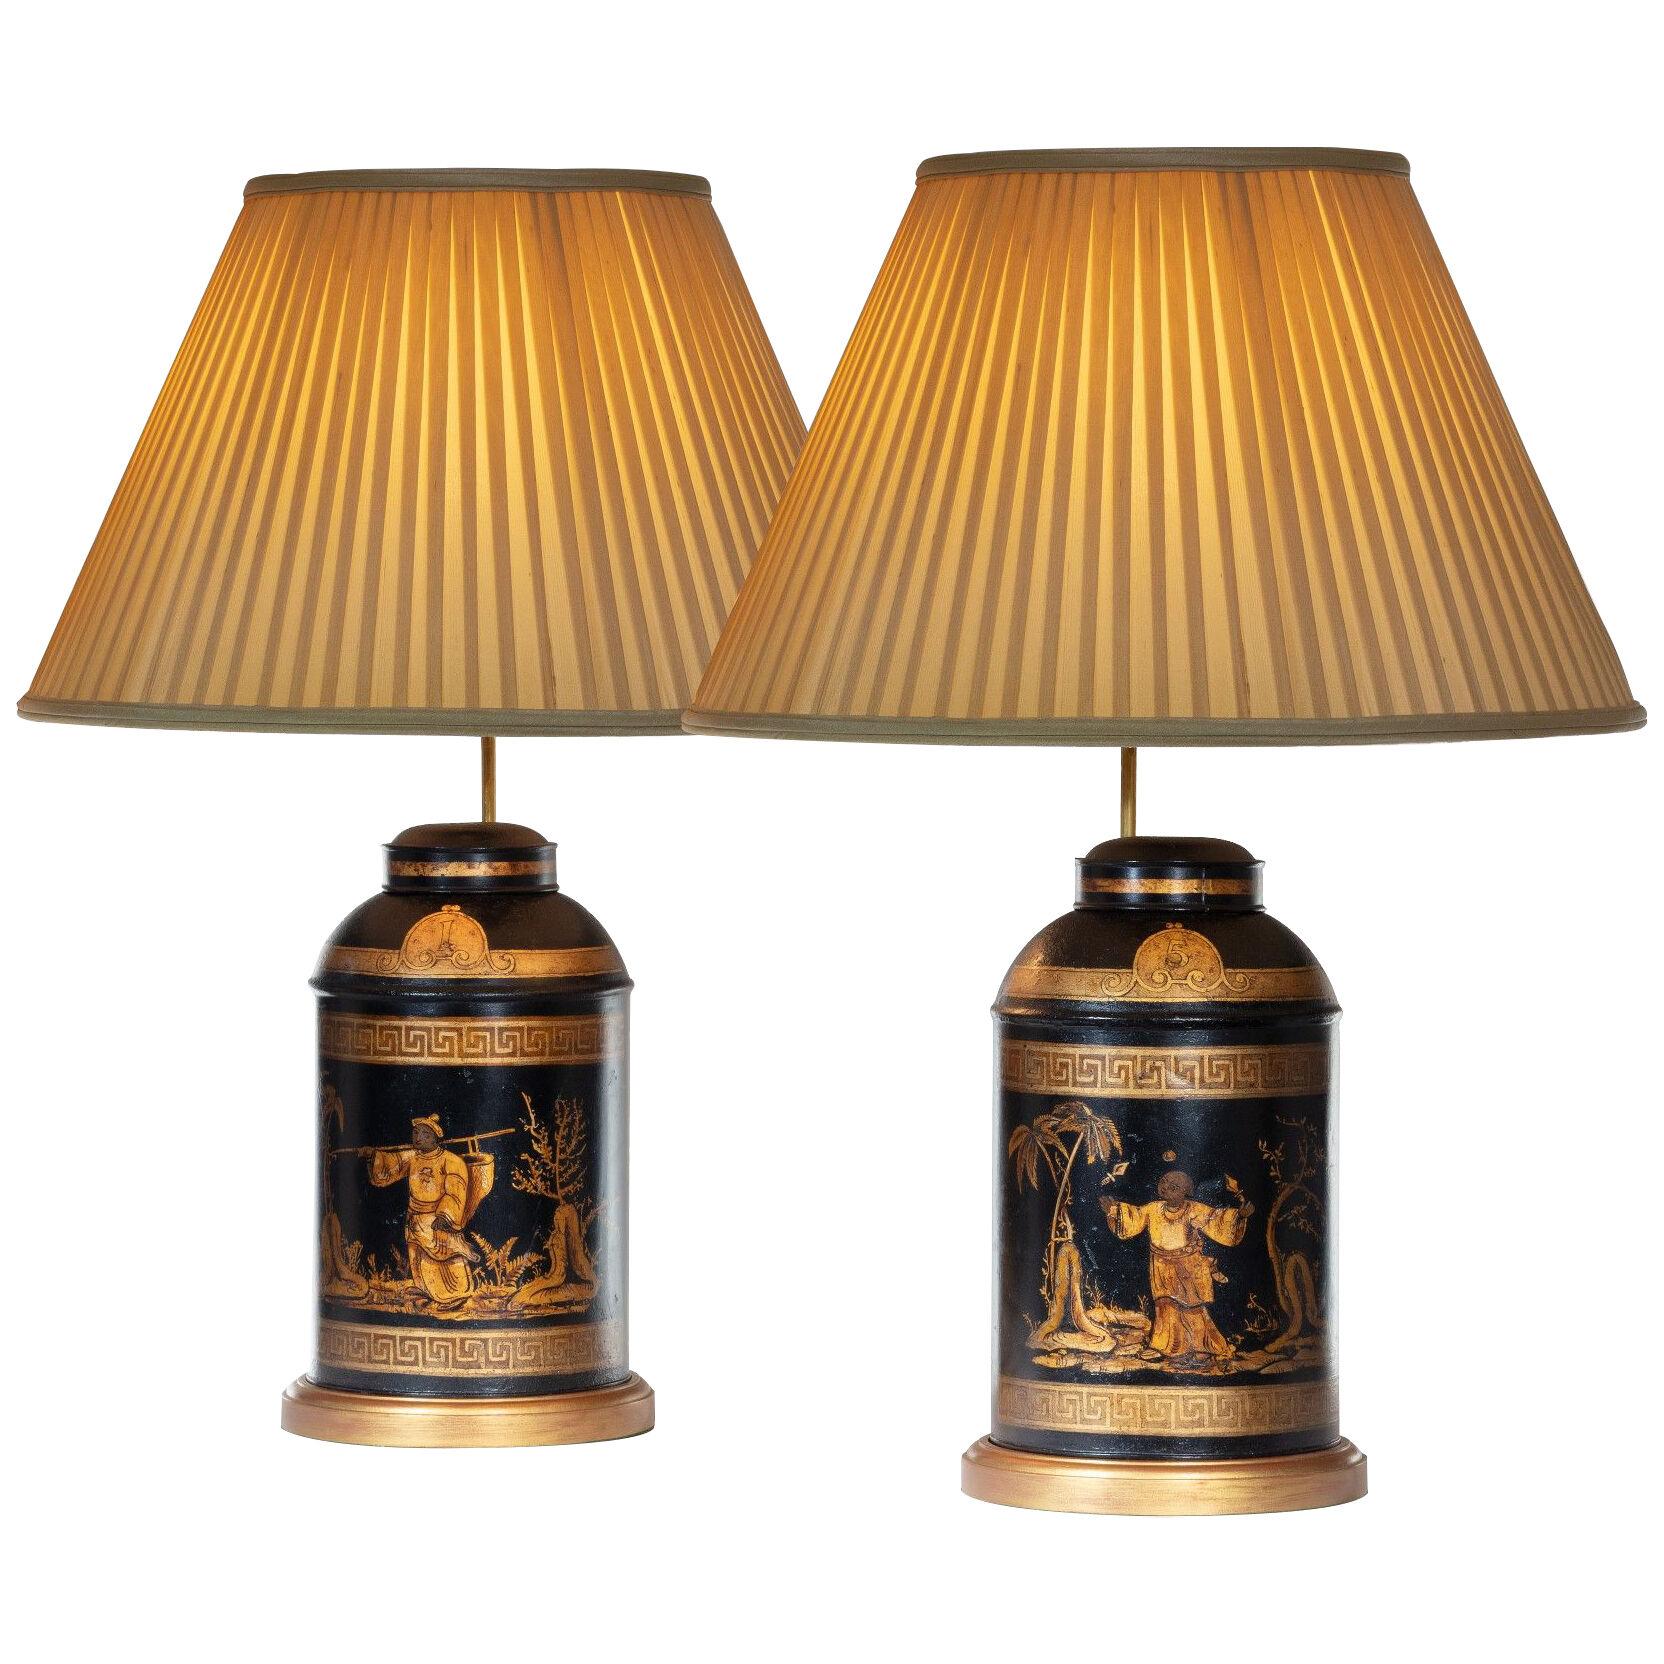 Pair of 19th Century Toleware Tea Canister Table Lamps